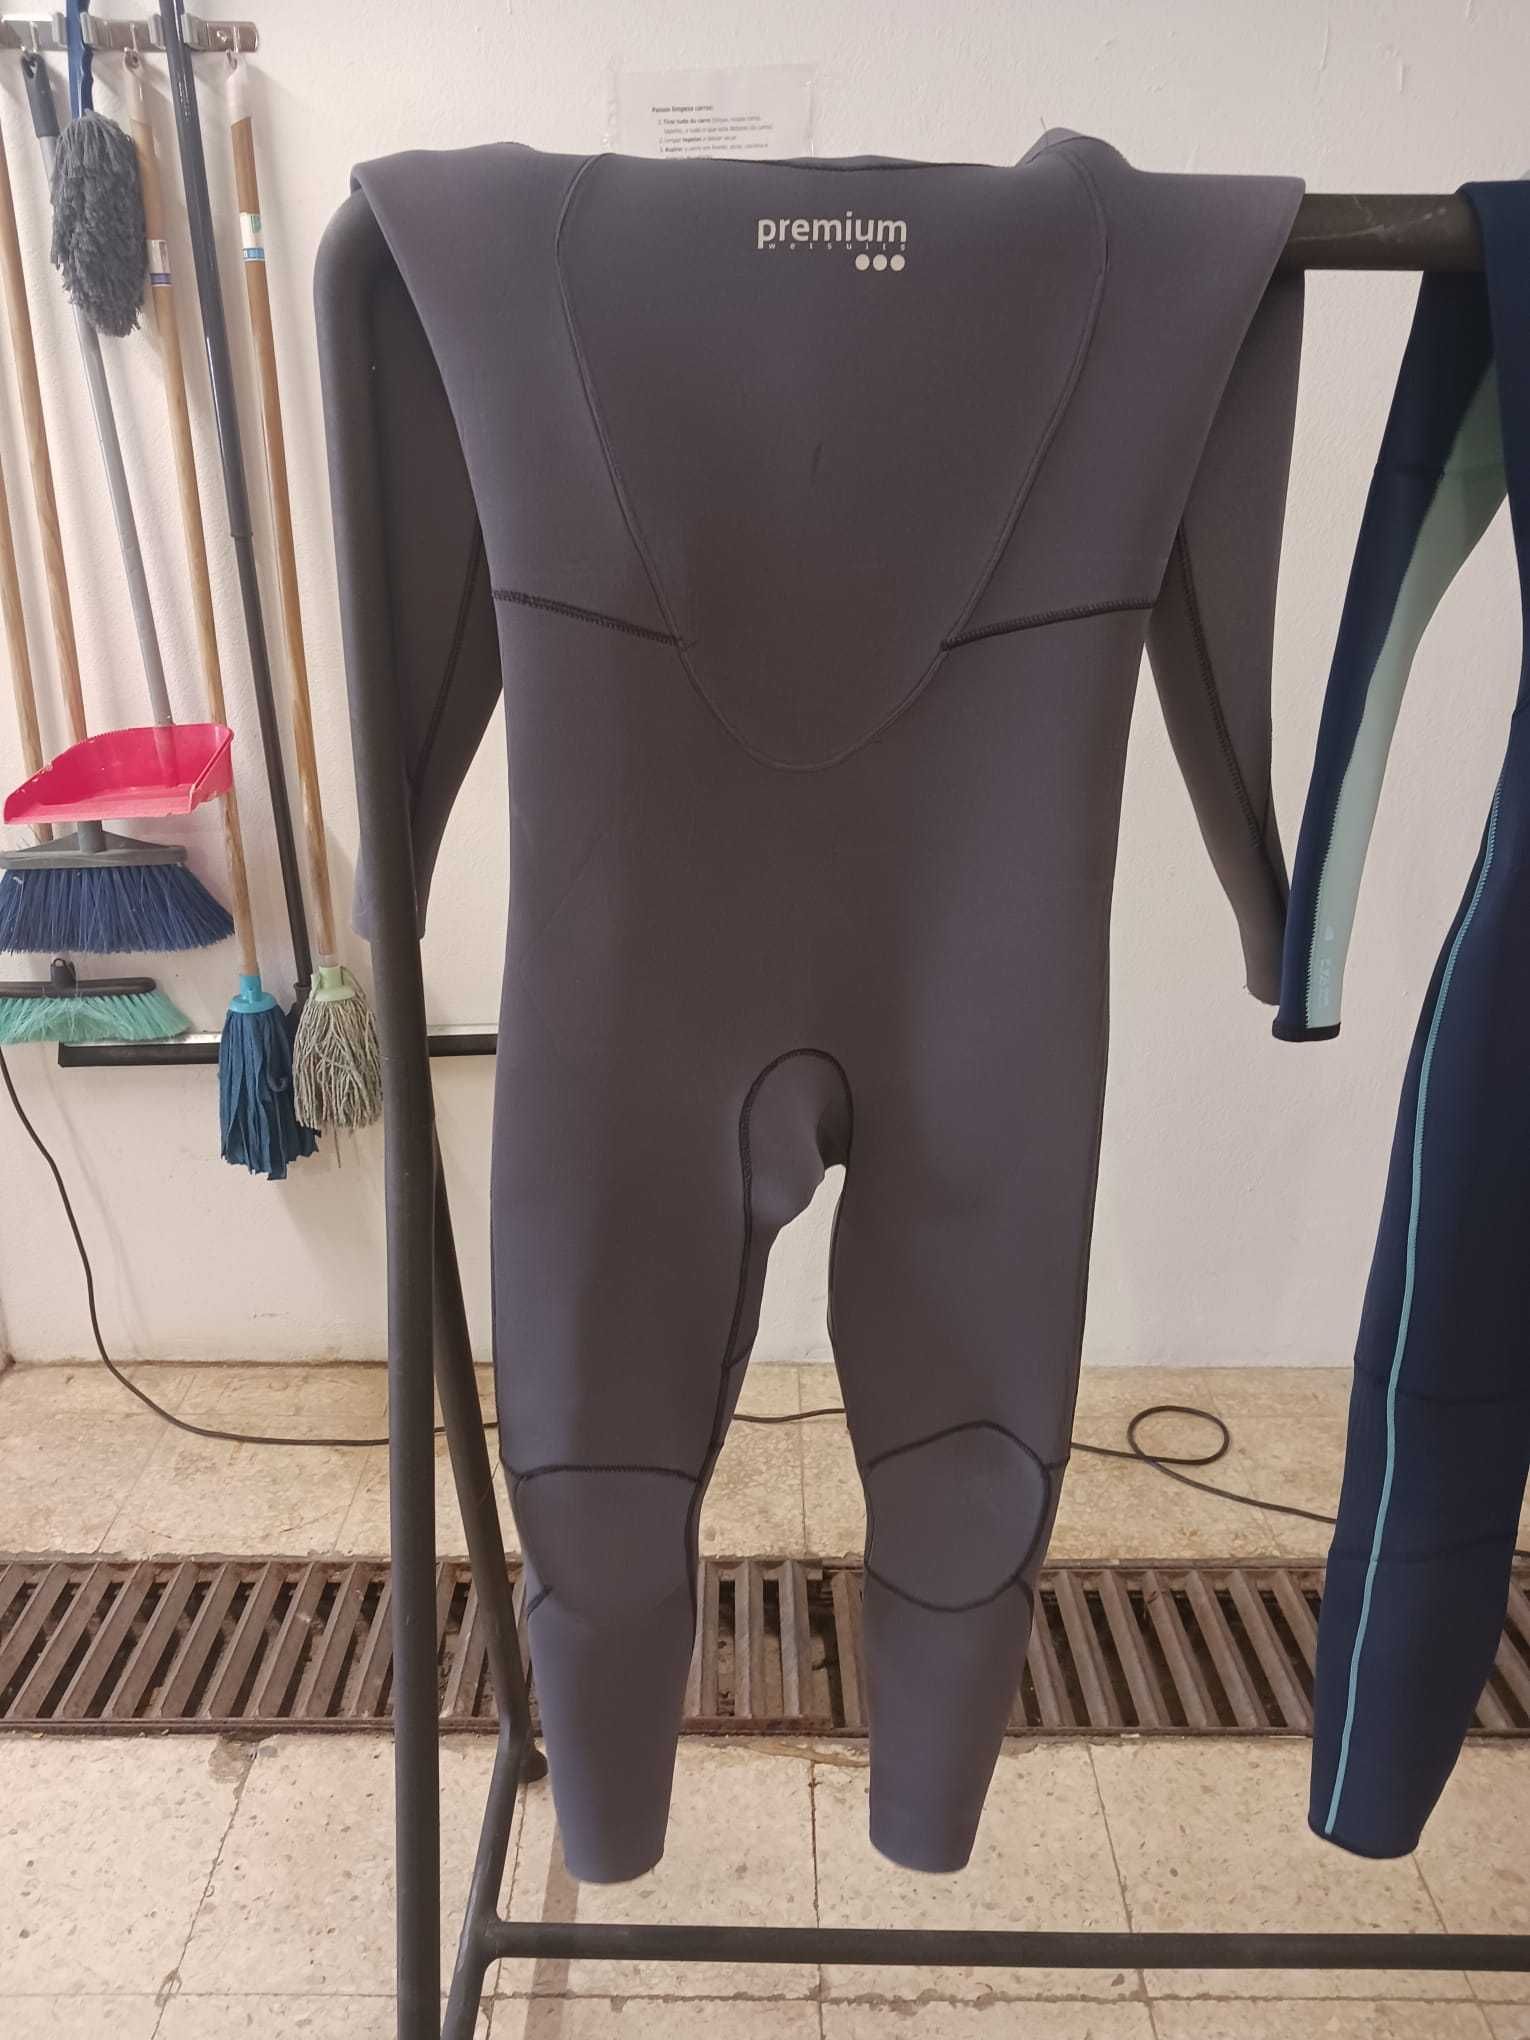 Kit 2 wetsuits + hard surfboard for 30€ (10€ each)